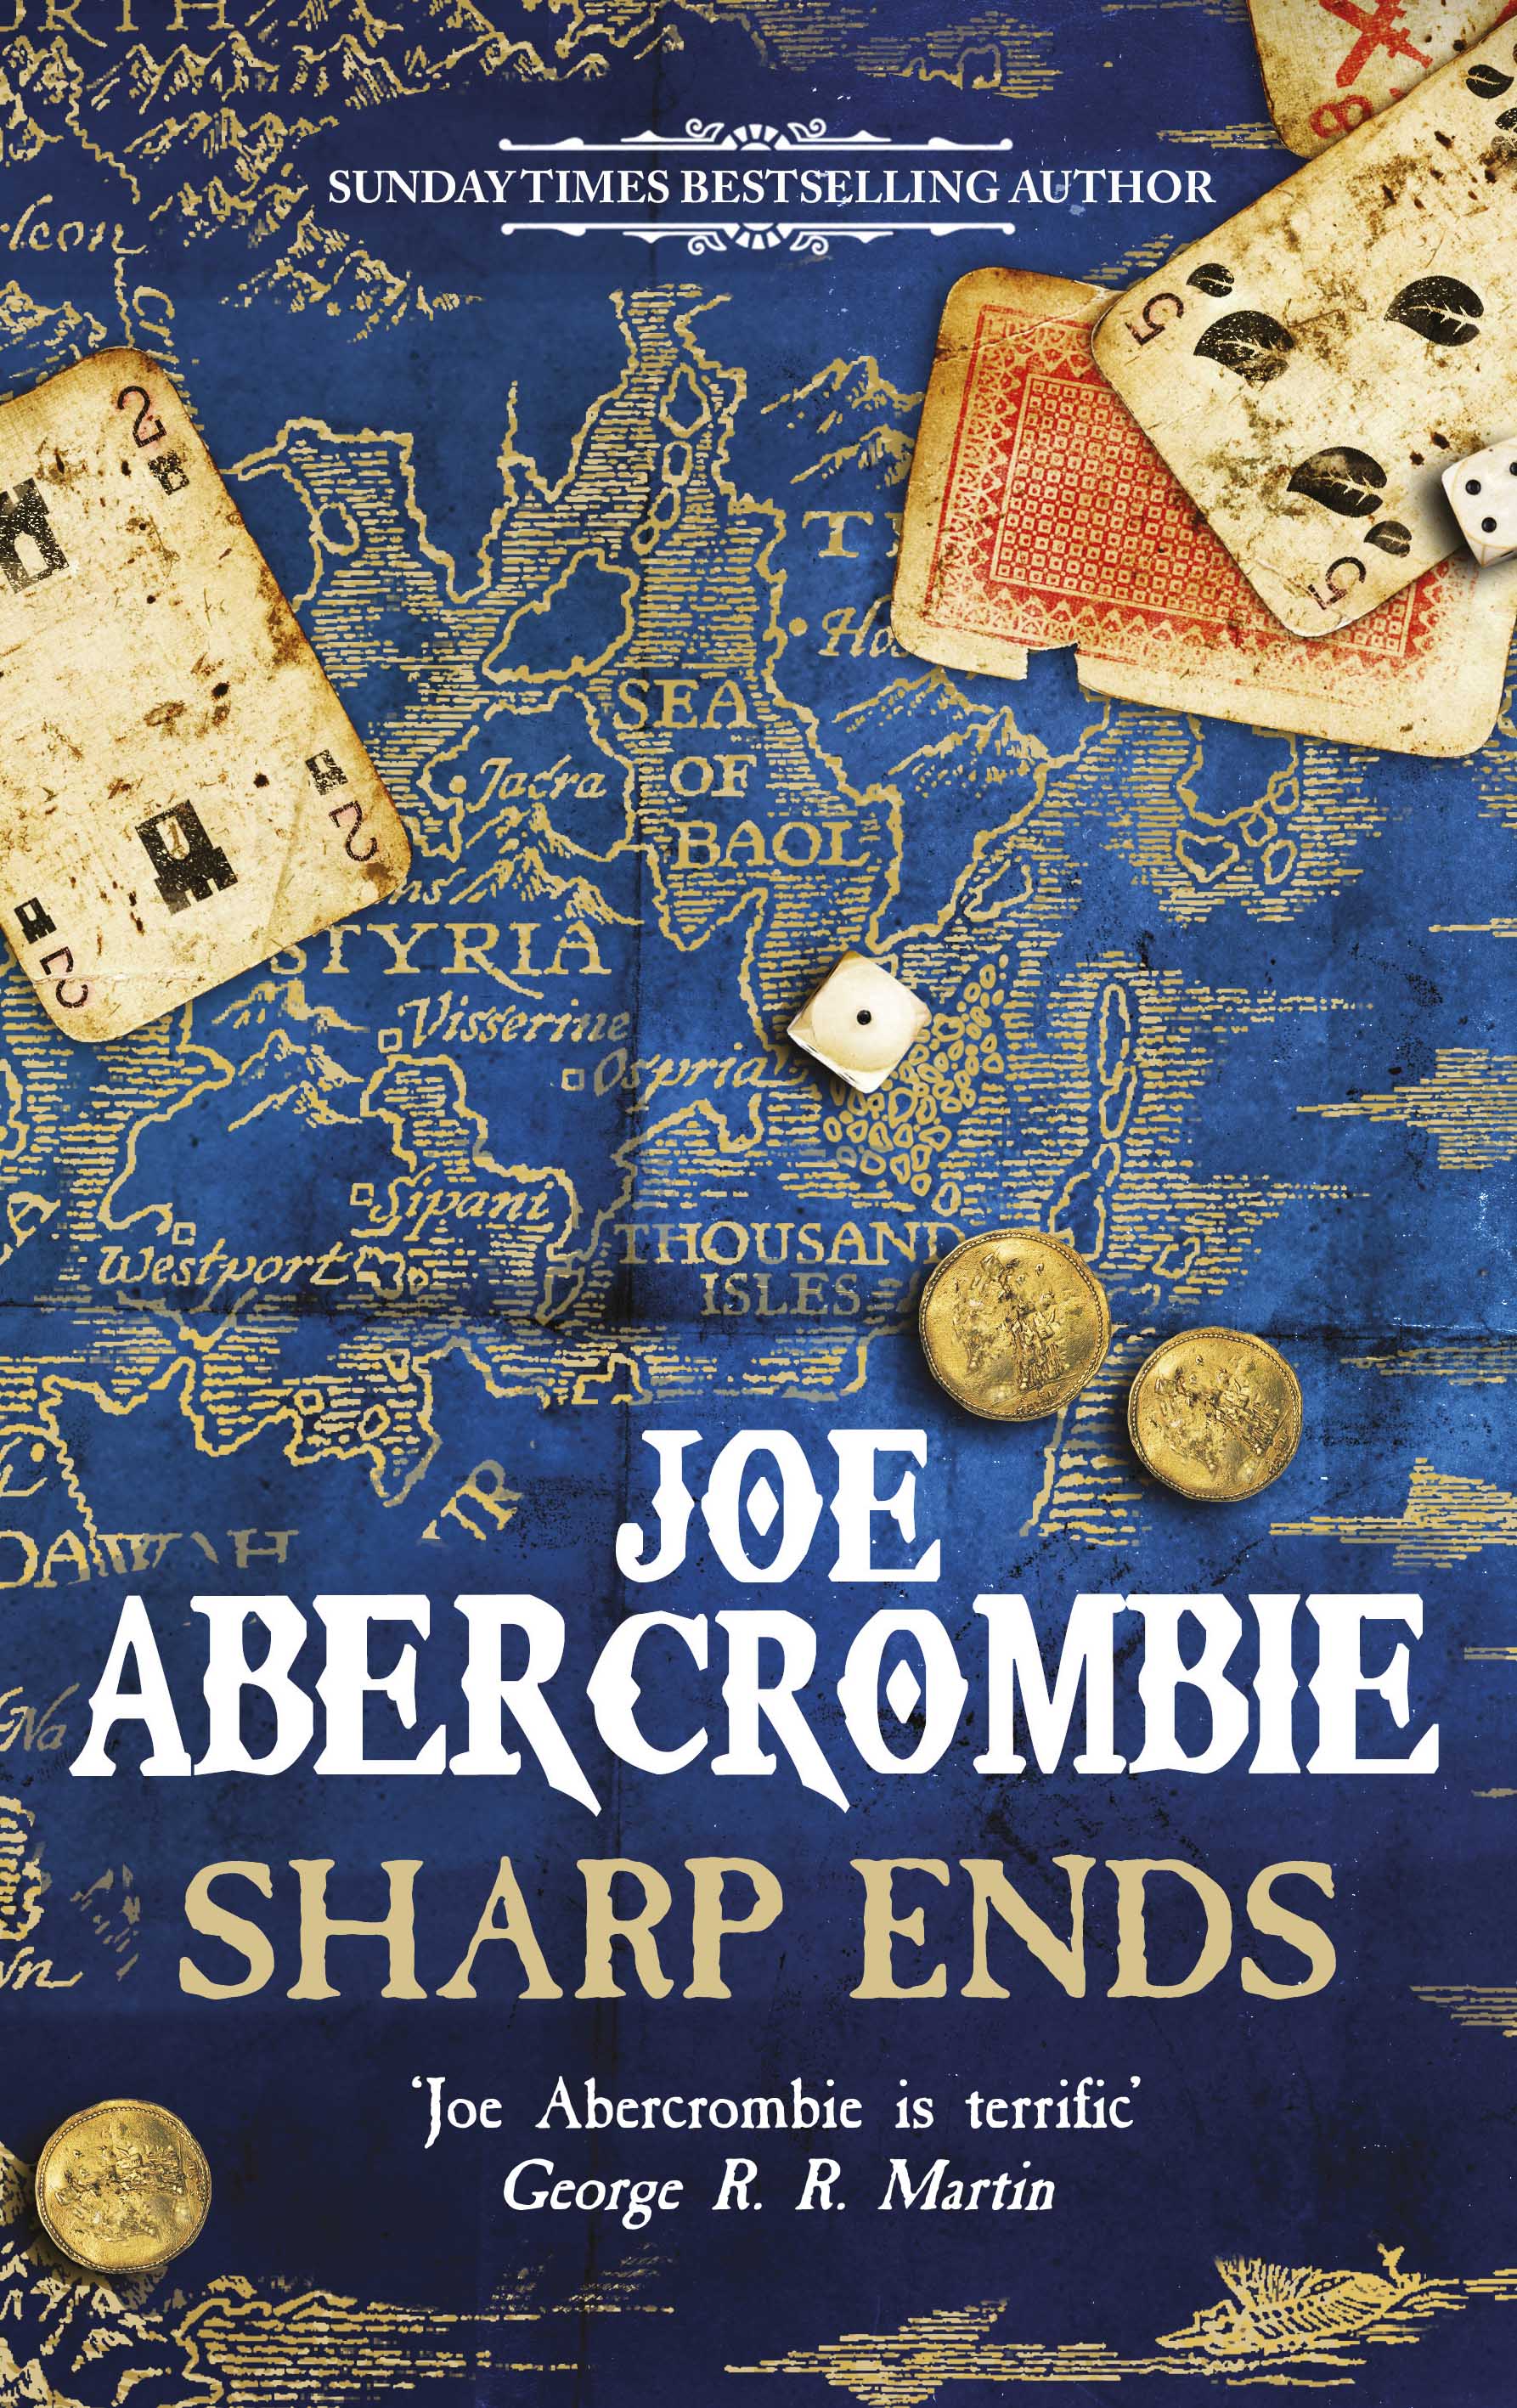 Sharp Ends by Joe Abercrombie book review - SciFiNow - The World's Best